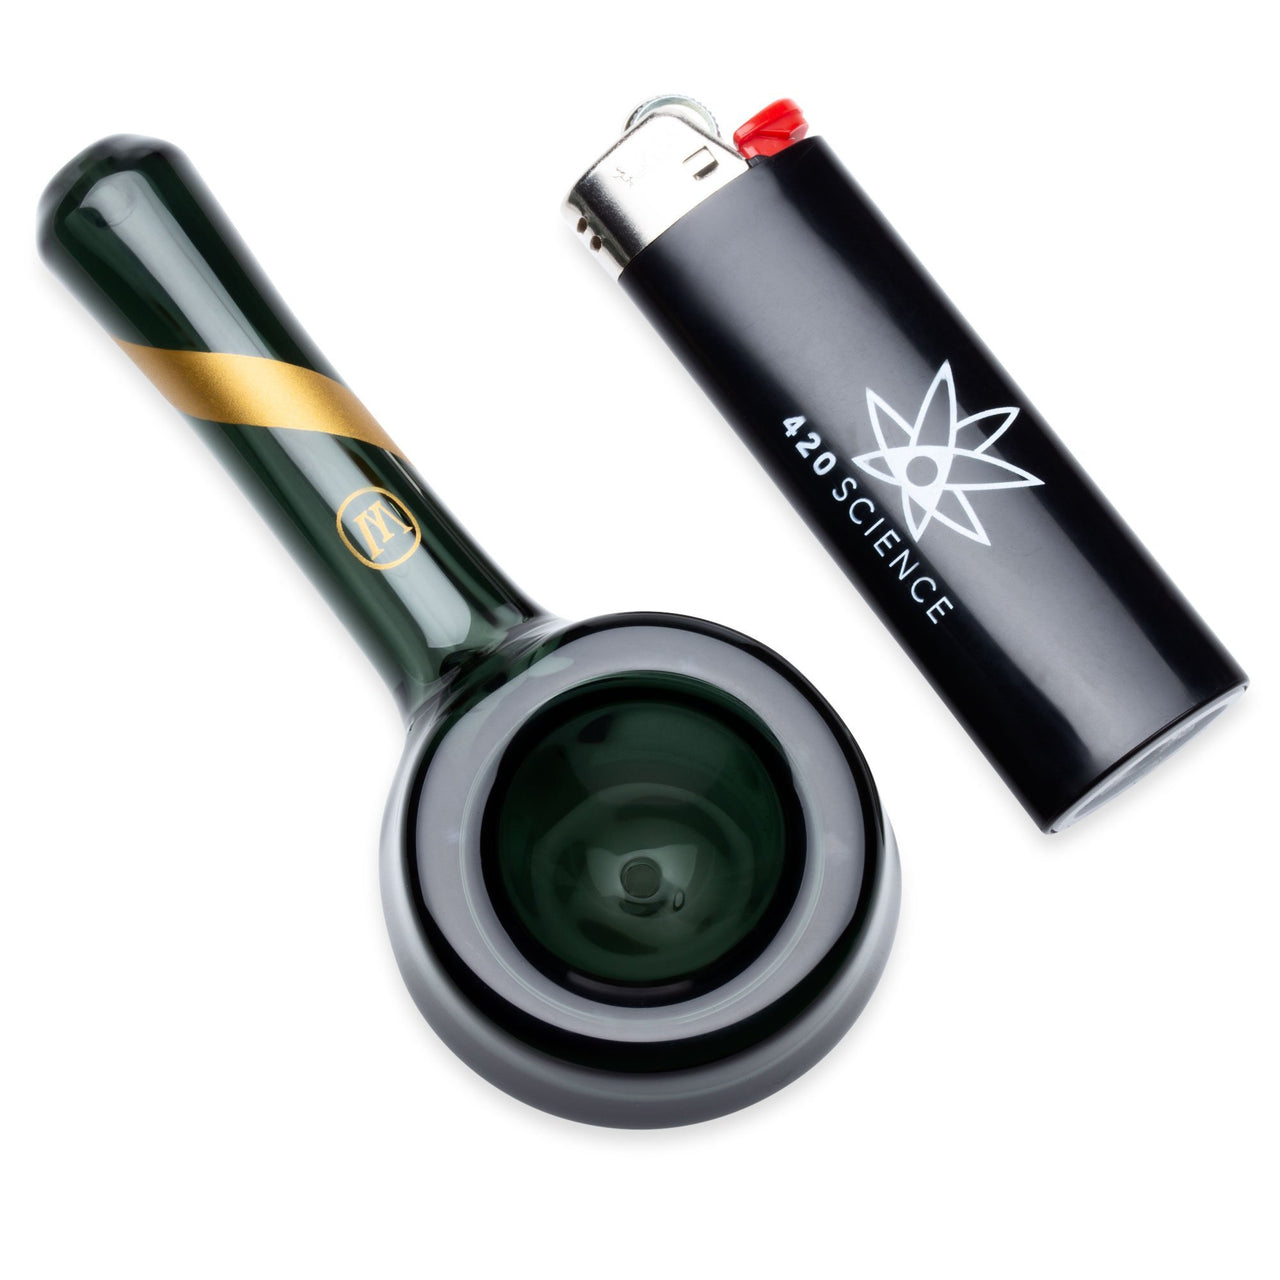 Higher Standards Heavy Duty Spoon Pipe / $ 59.99 at 420 Science